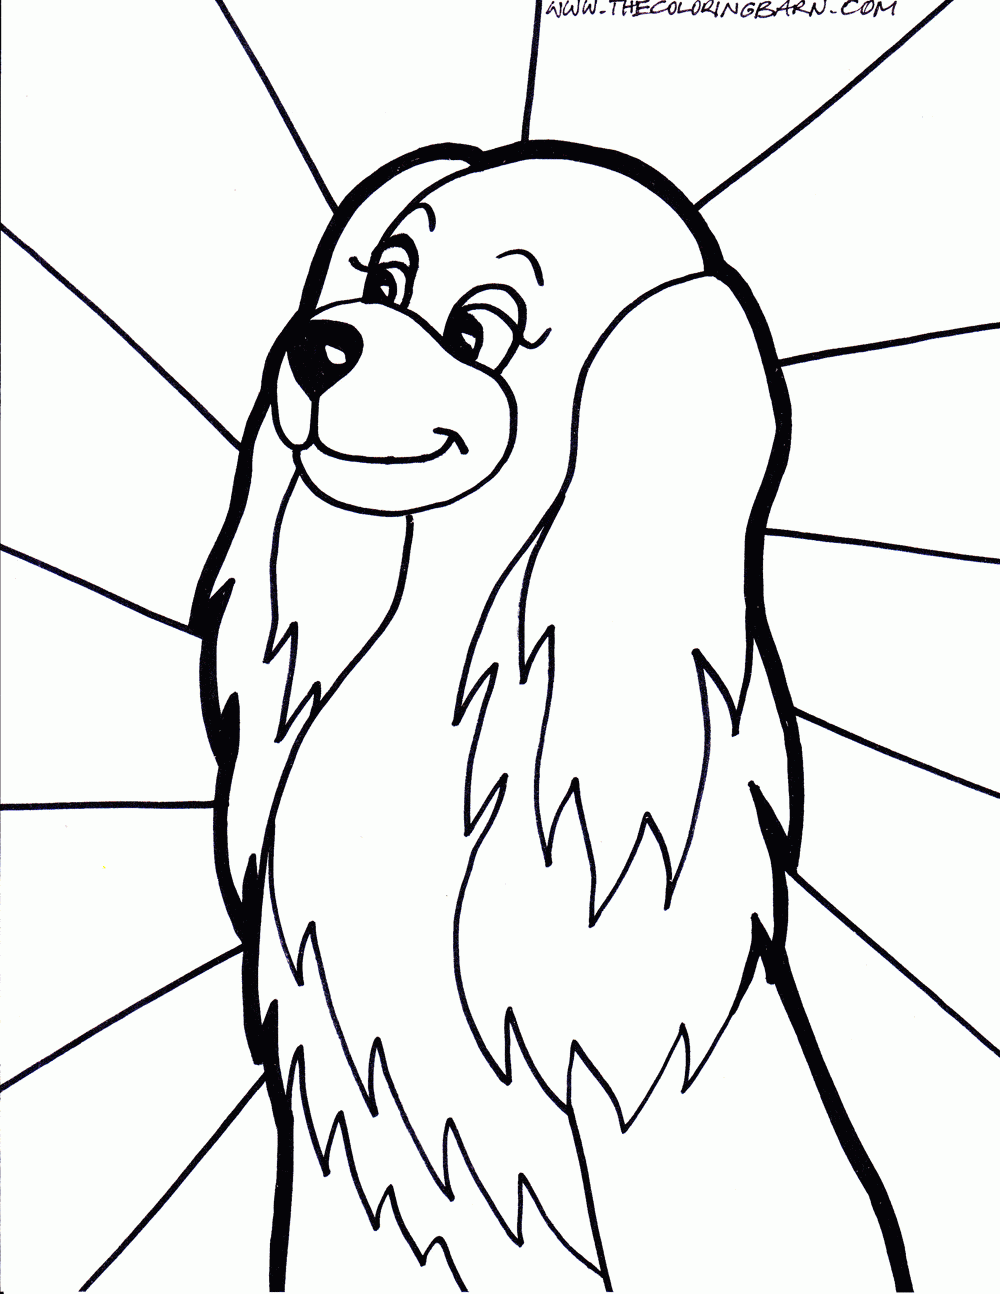 Coloring Pages Fluffy Dogs - Coloring Home